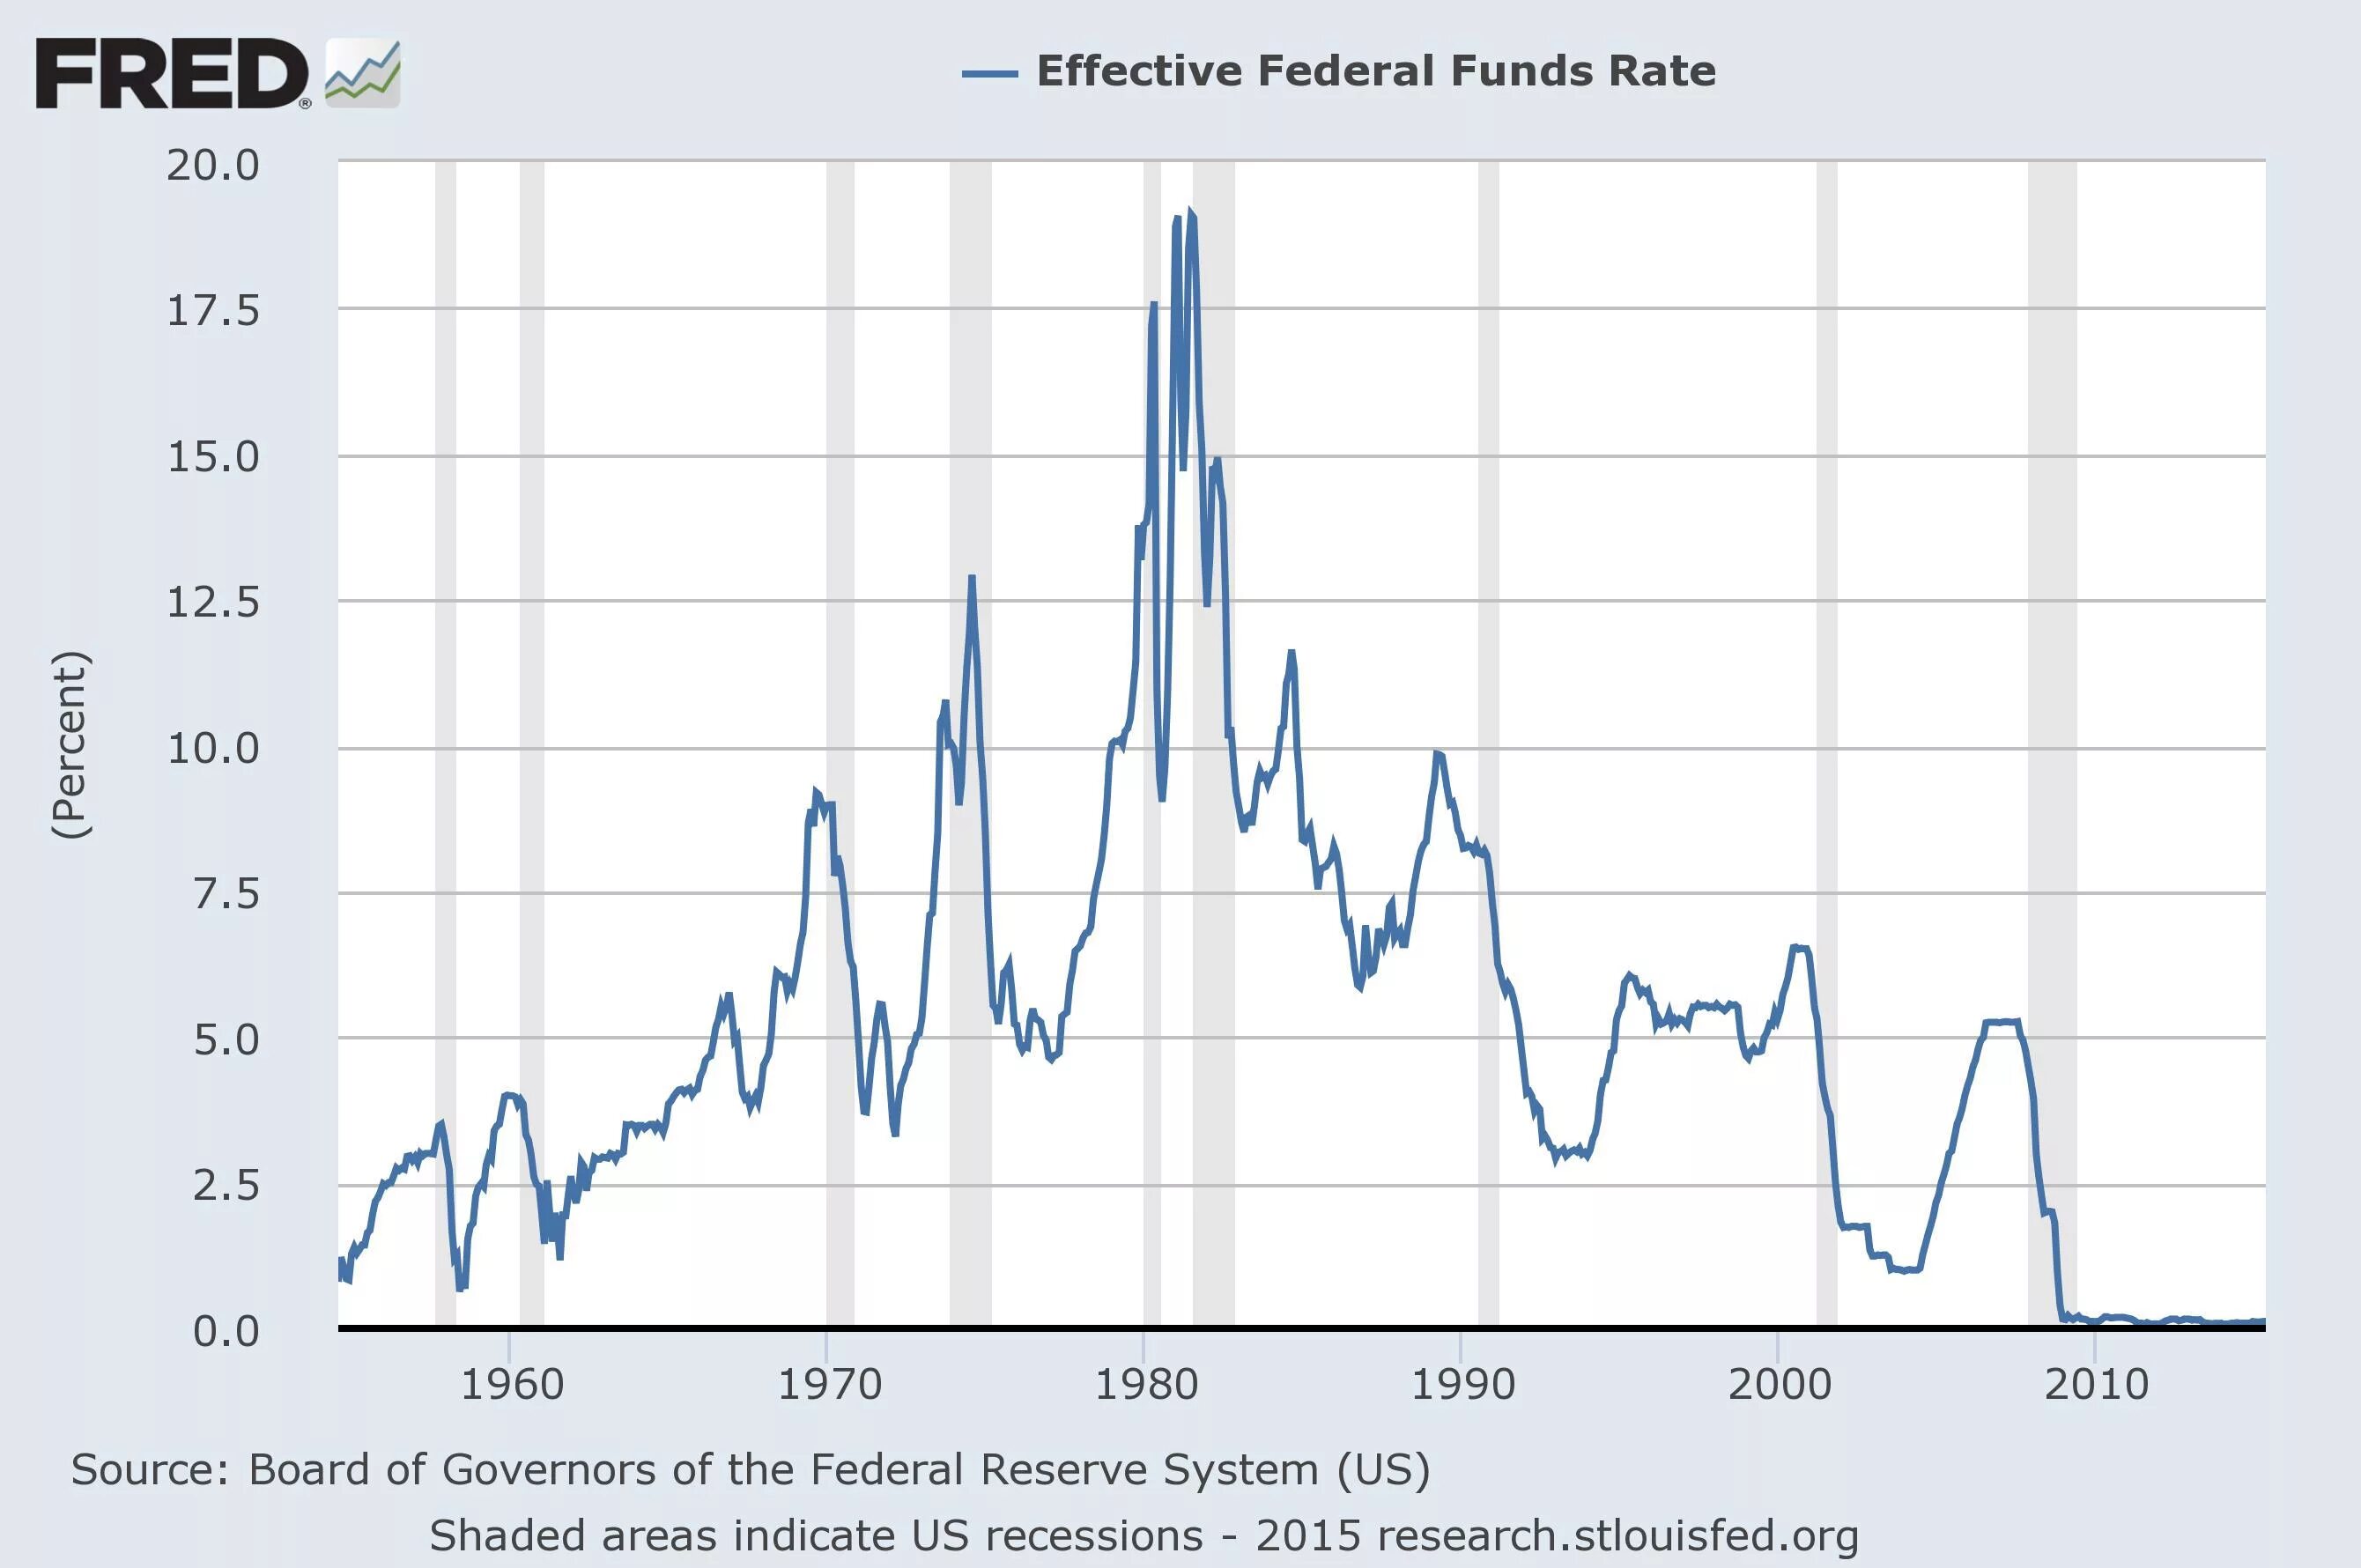 Starting rate. Fed Funds rate Fred. Fed rate 2.50. Raise interest rates. X50 rates.